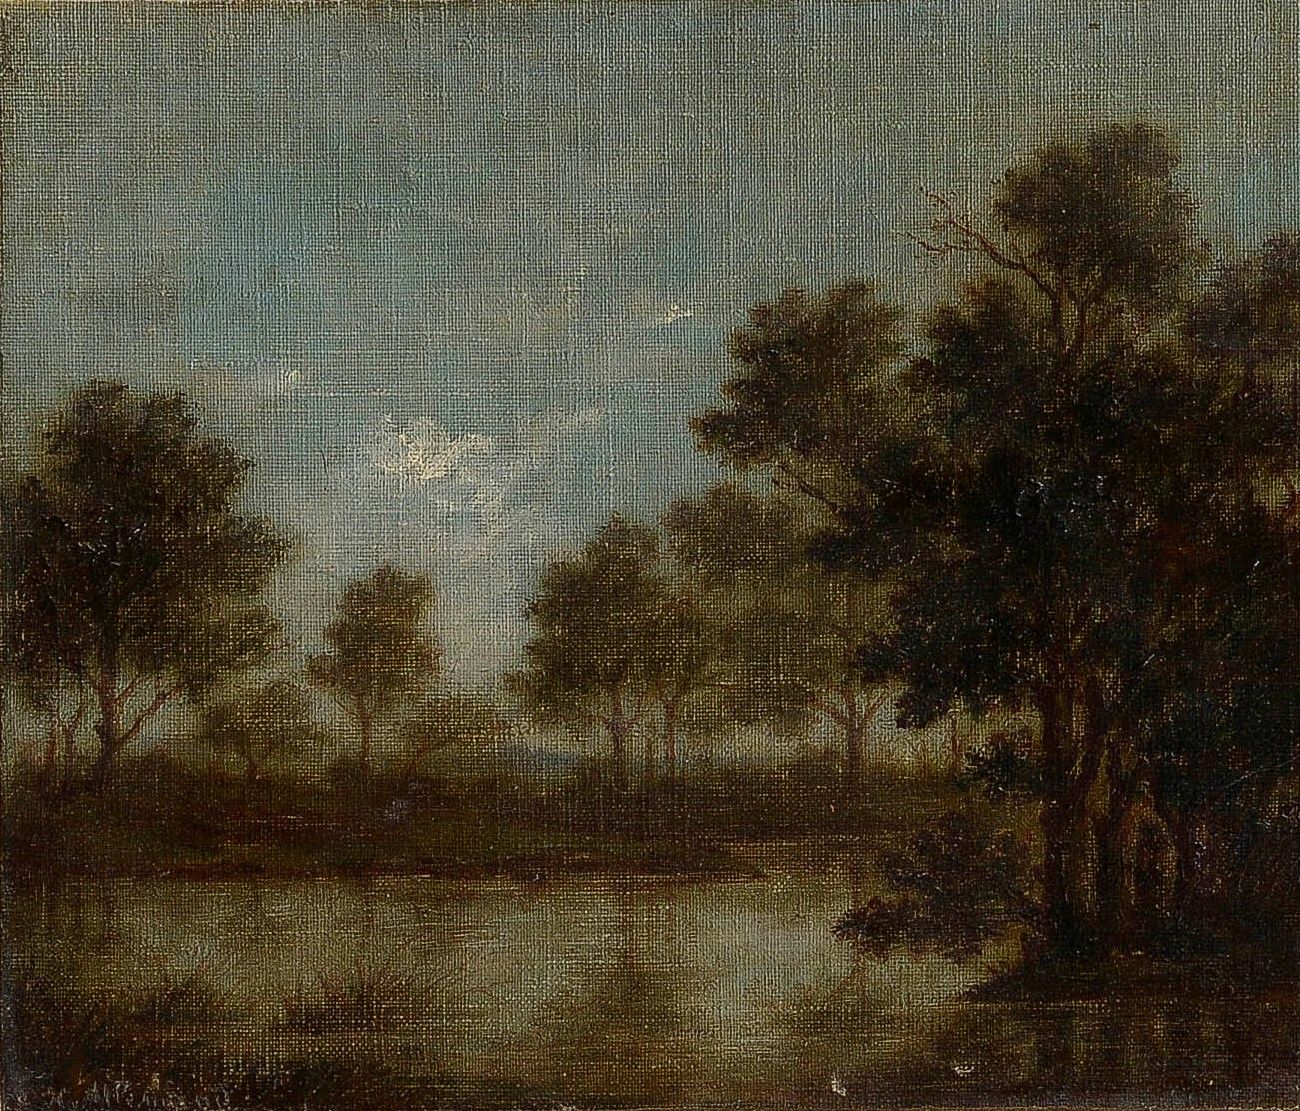 Null Hector ALLEMAND (1809-1886)

Landscape with a pond

Oil on canvas pasted on&hellip;